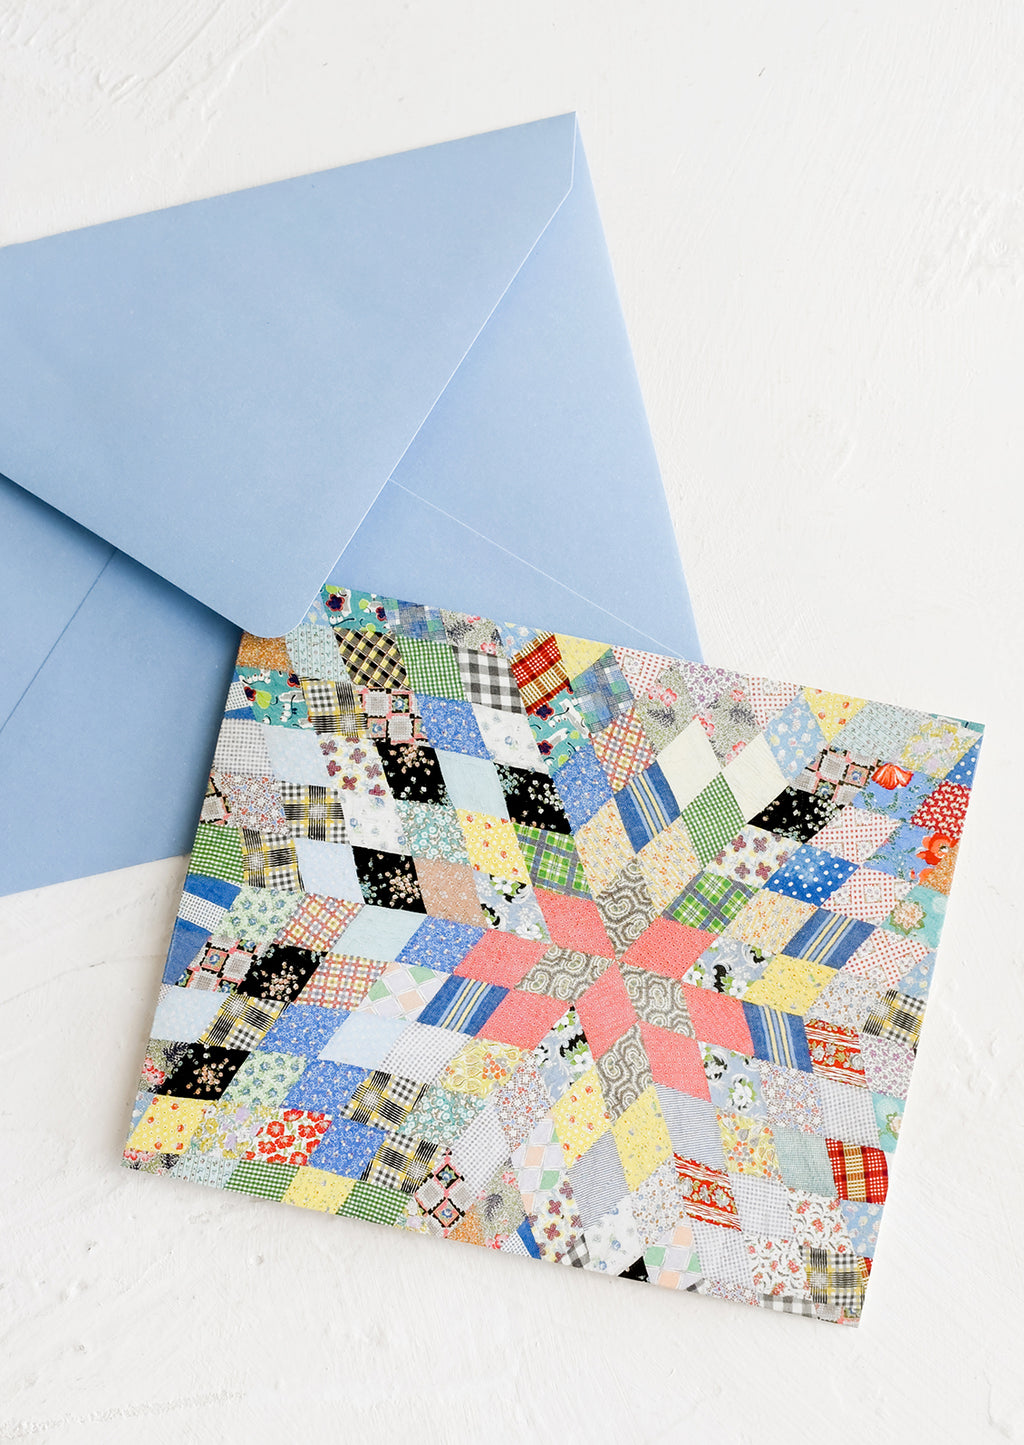 3: A card and envelope with quilt pattern.